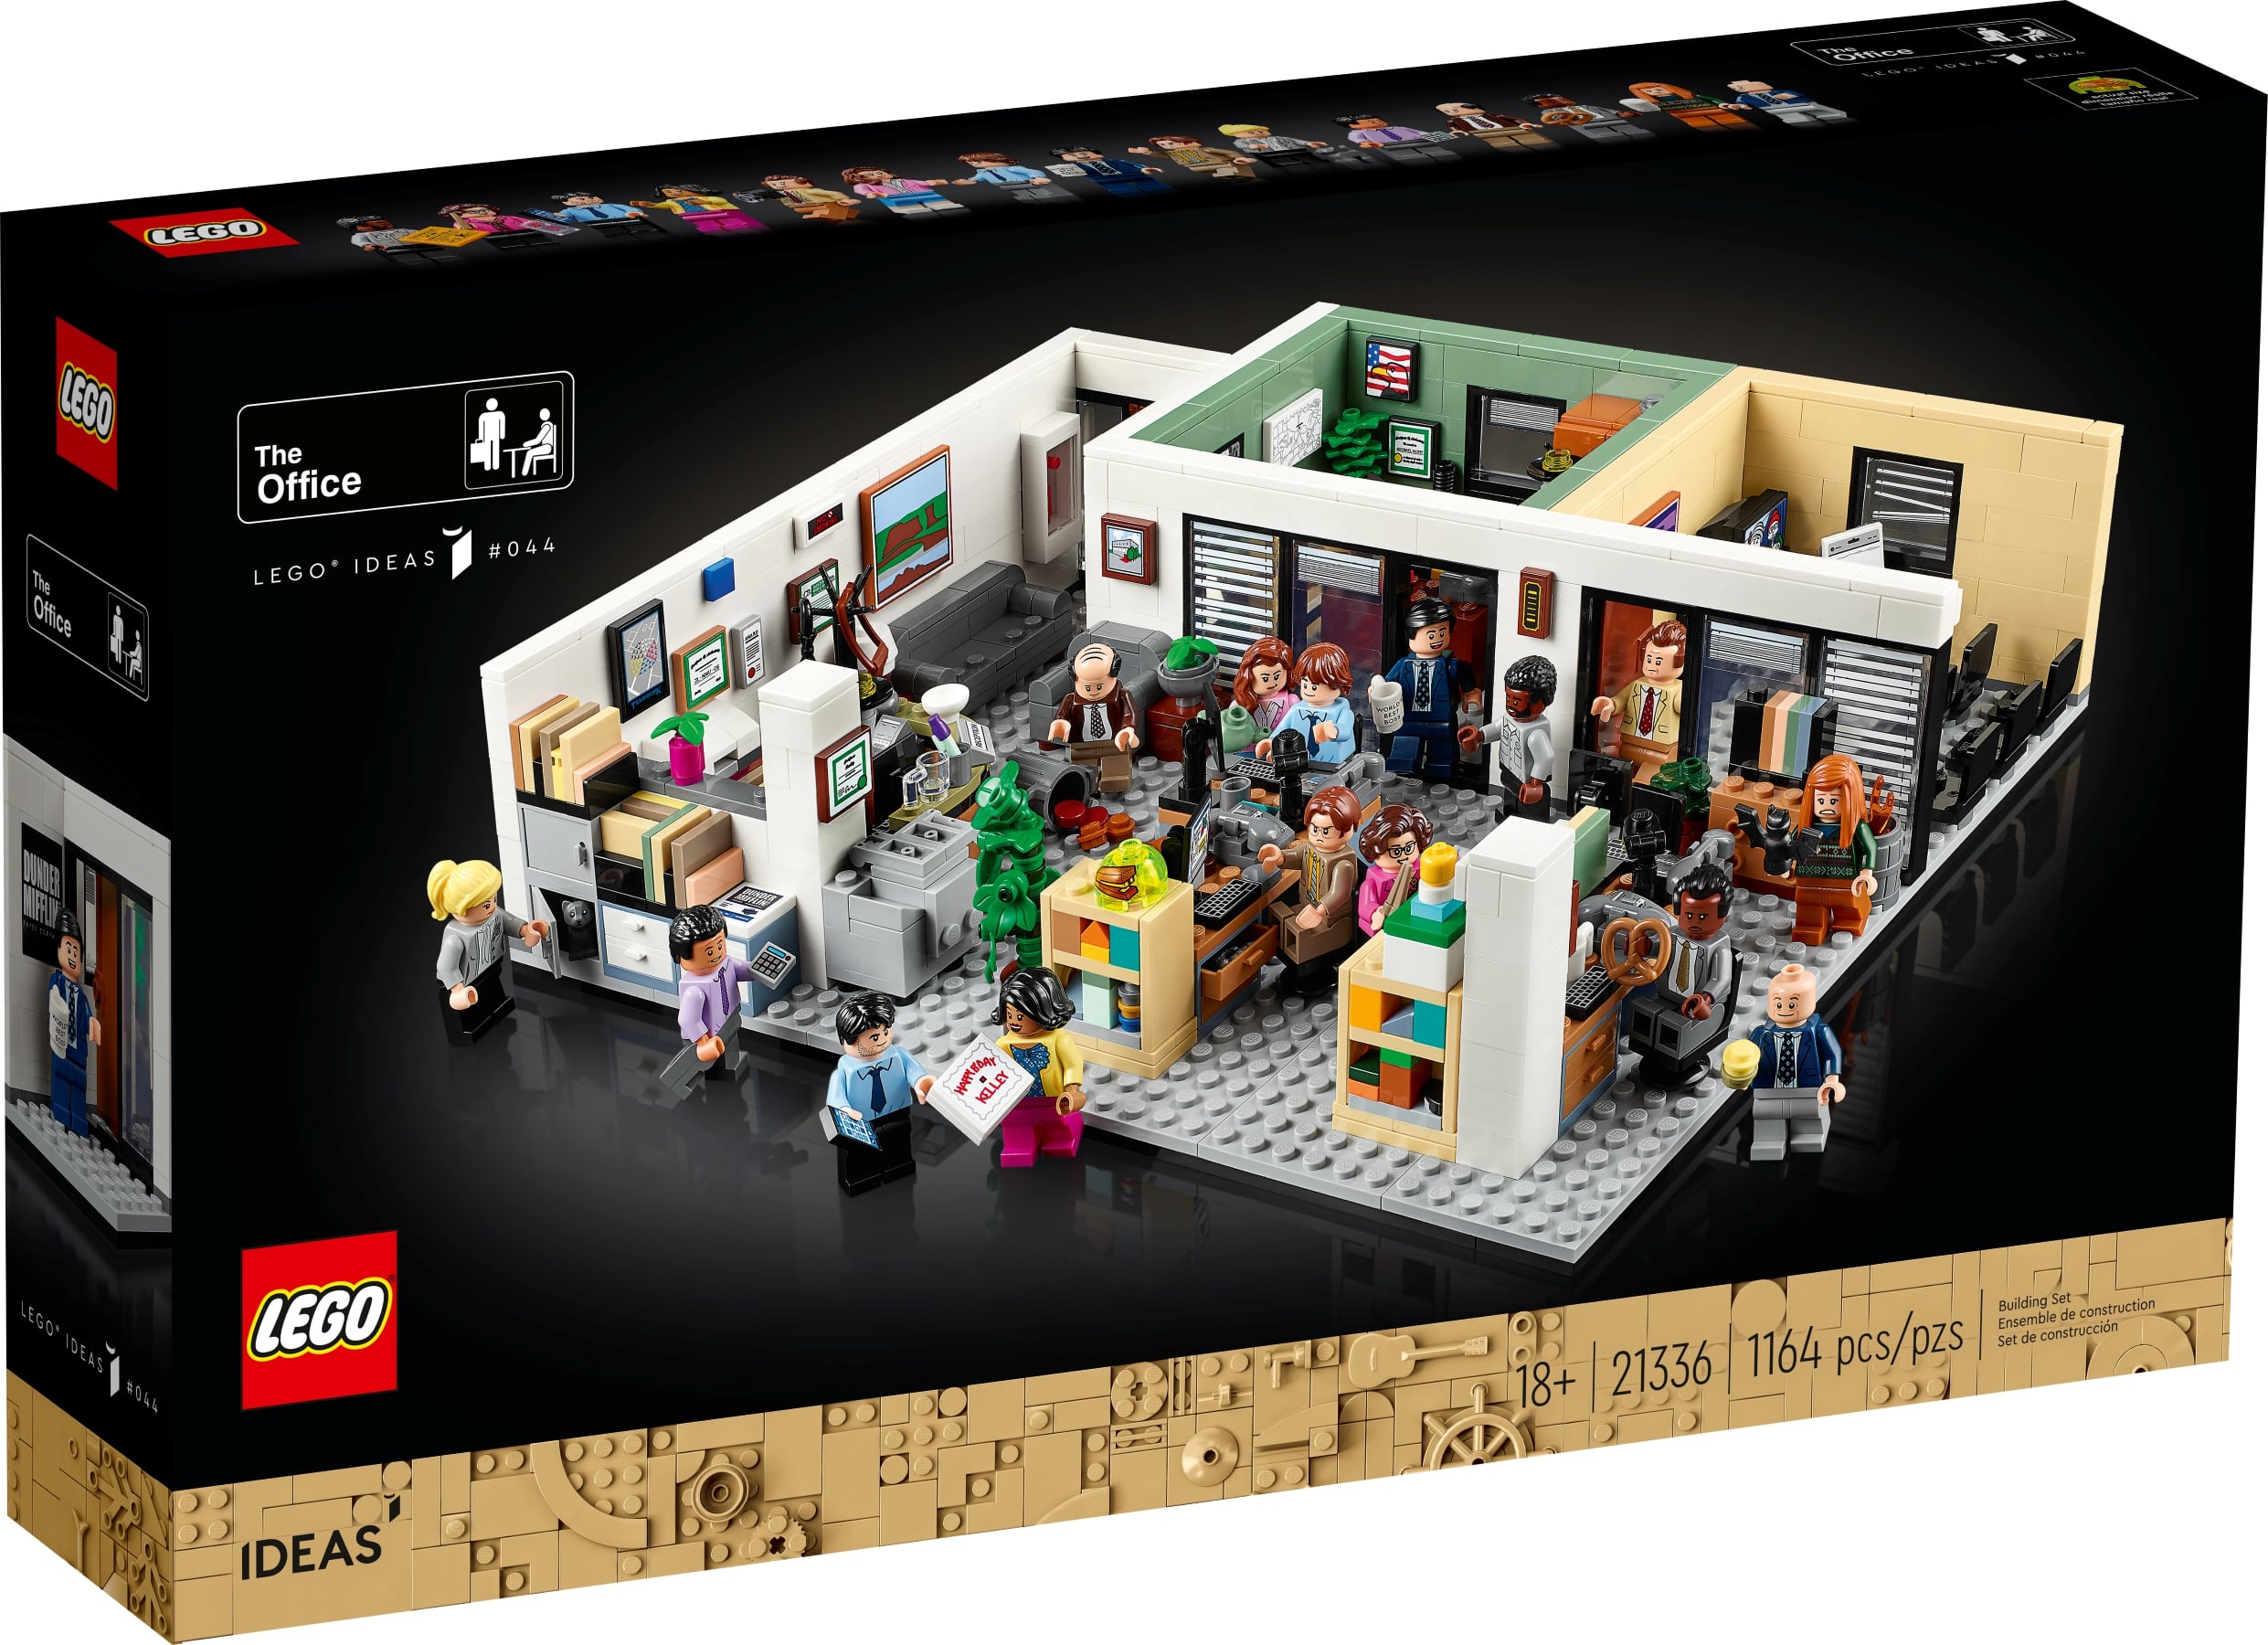 LEGO Ideas - Buy & Sell Collectibles.